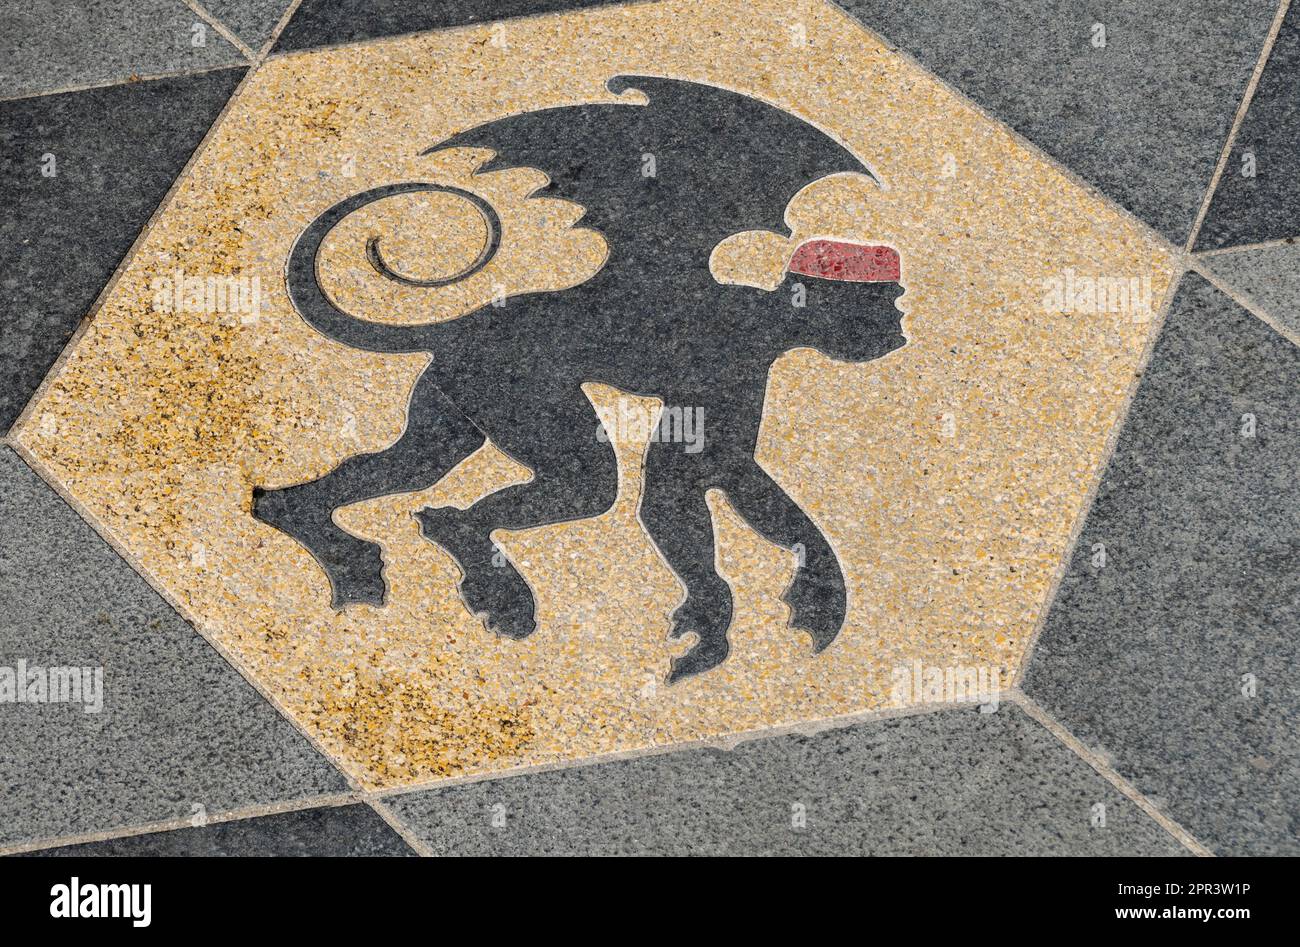 Illustration of an evil winged monkey from The Wizard of Oz Stock Photo